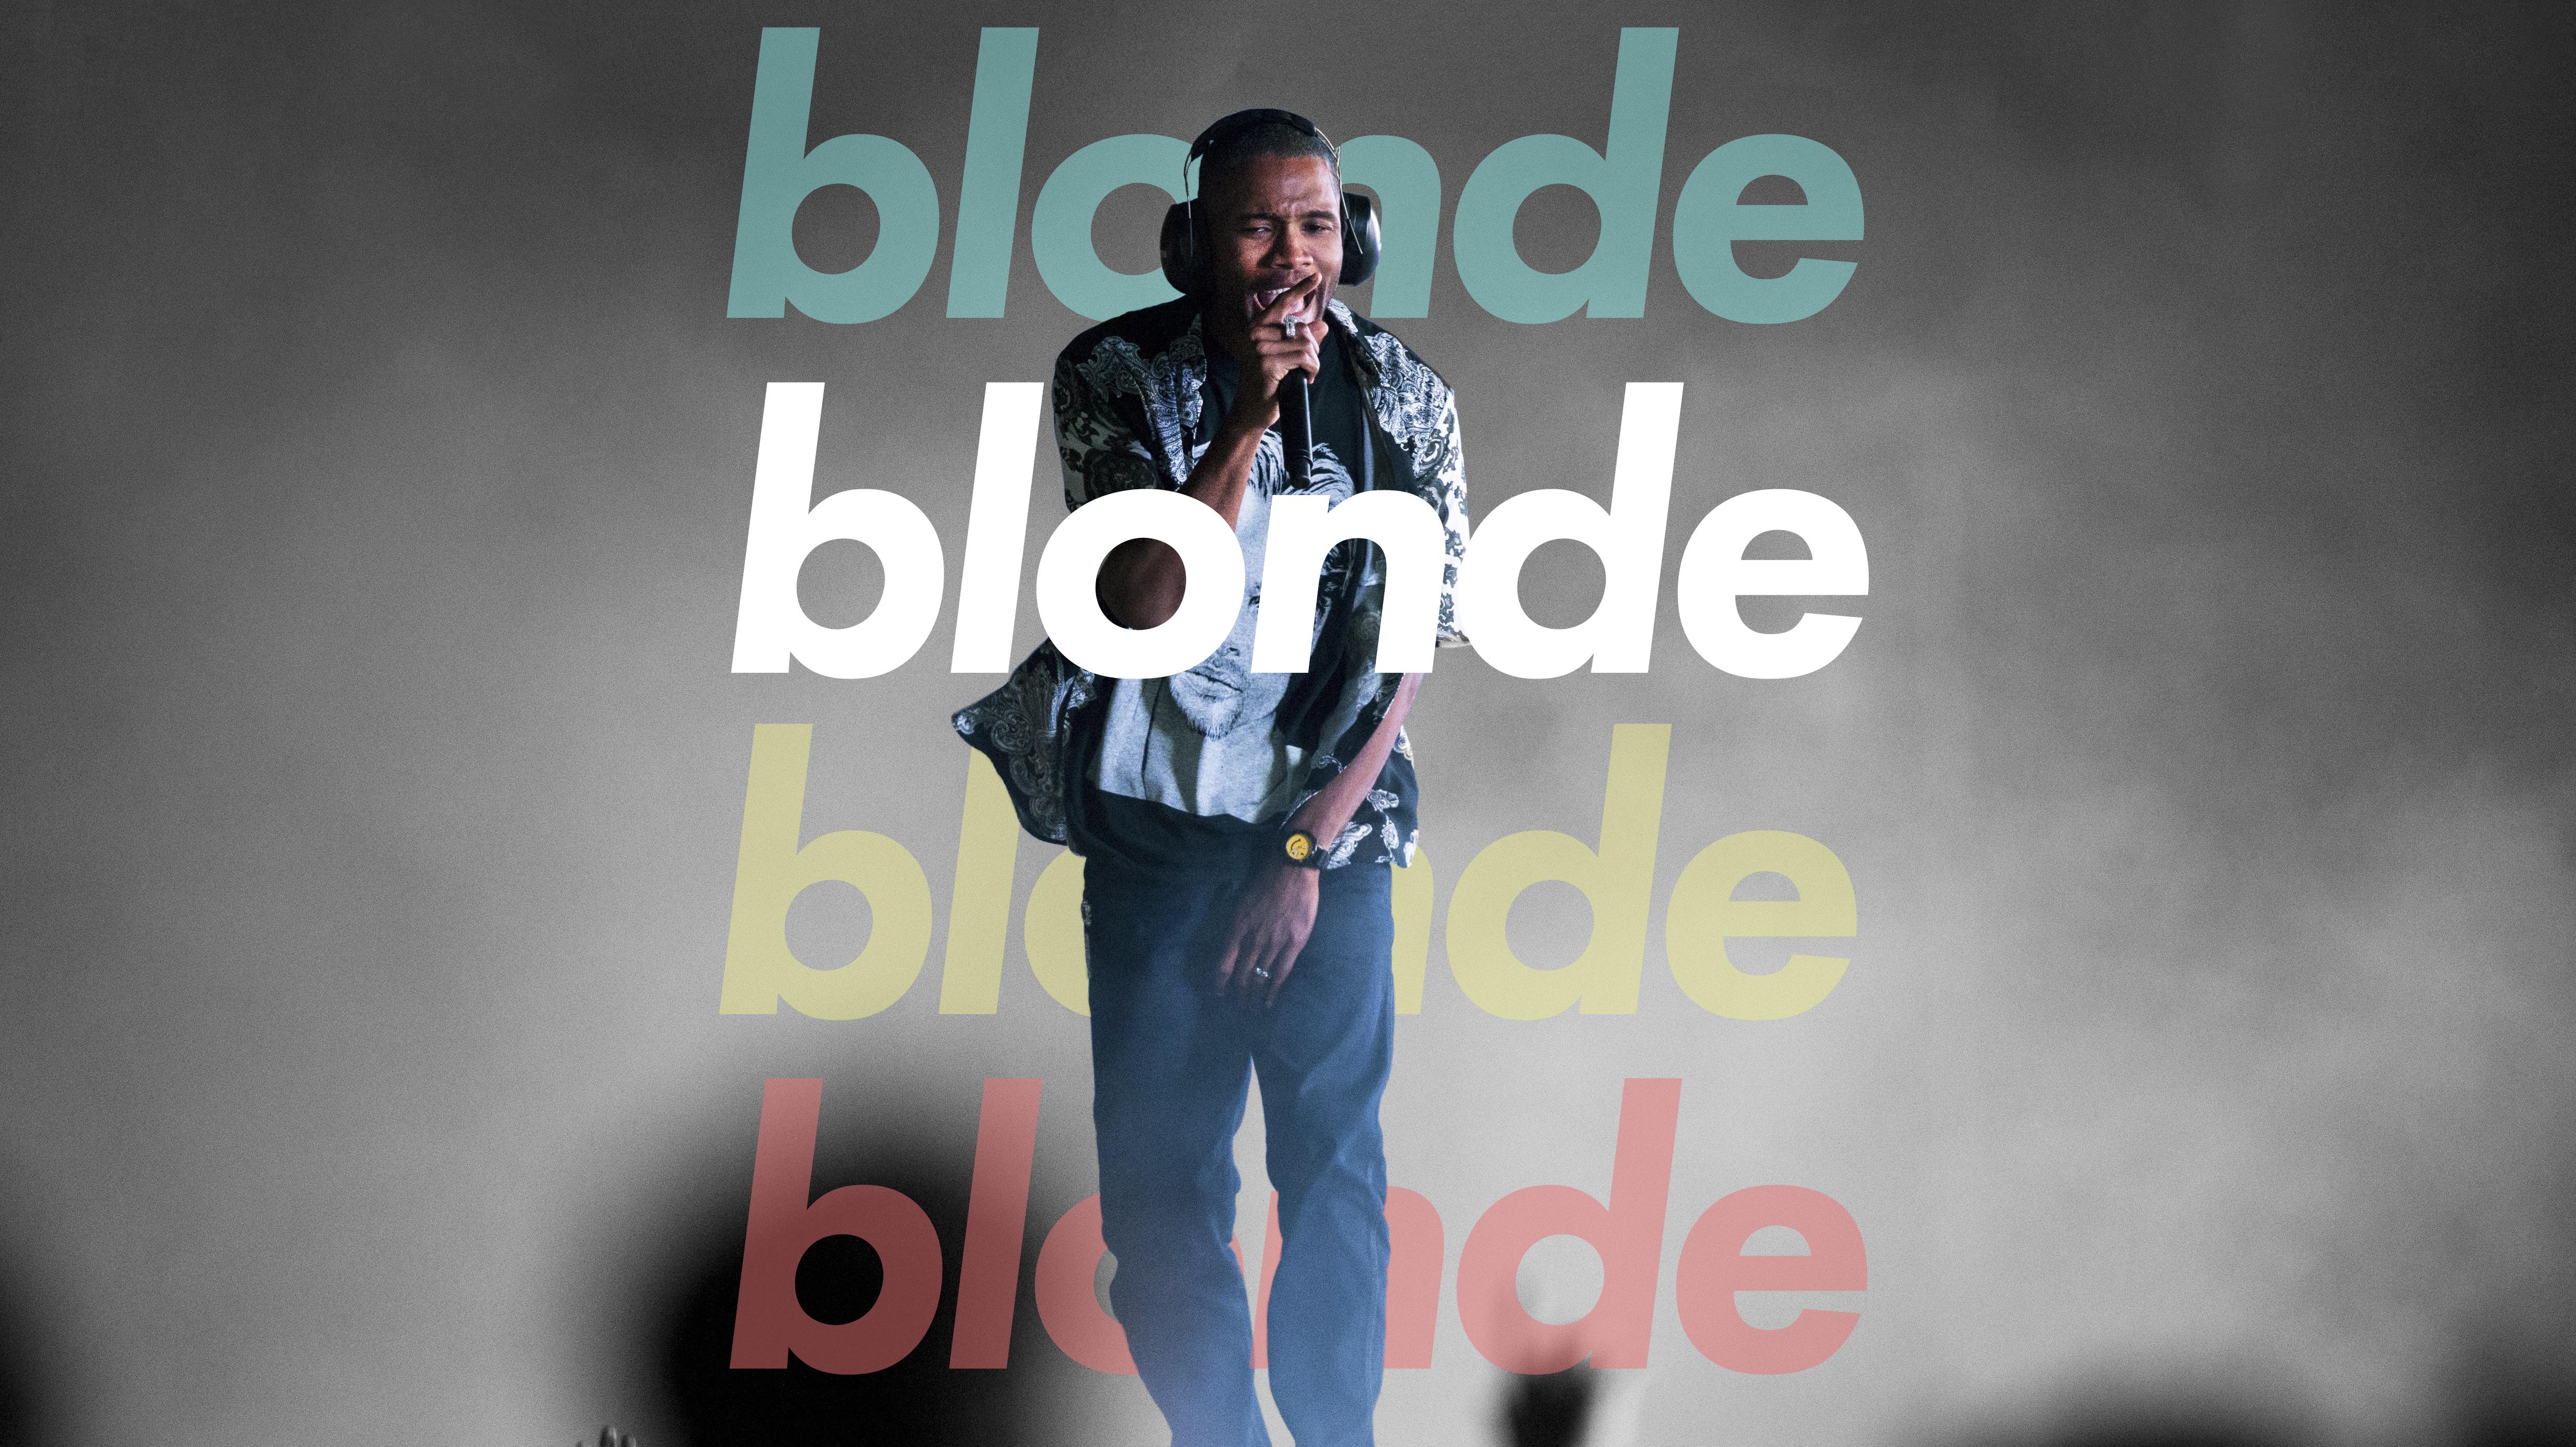 Frank Ocean Poster Blonde 2 Posters Cover Canvas Aesthetic Room Decor HD  Print with Track List Boys Dorm Painting Office Wallpaper Painting Gift  Framestyle 24x36inch60x90cm  Amazonca Home